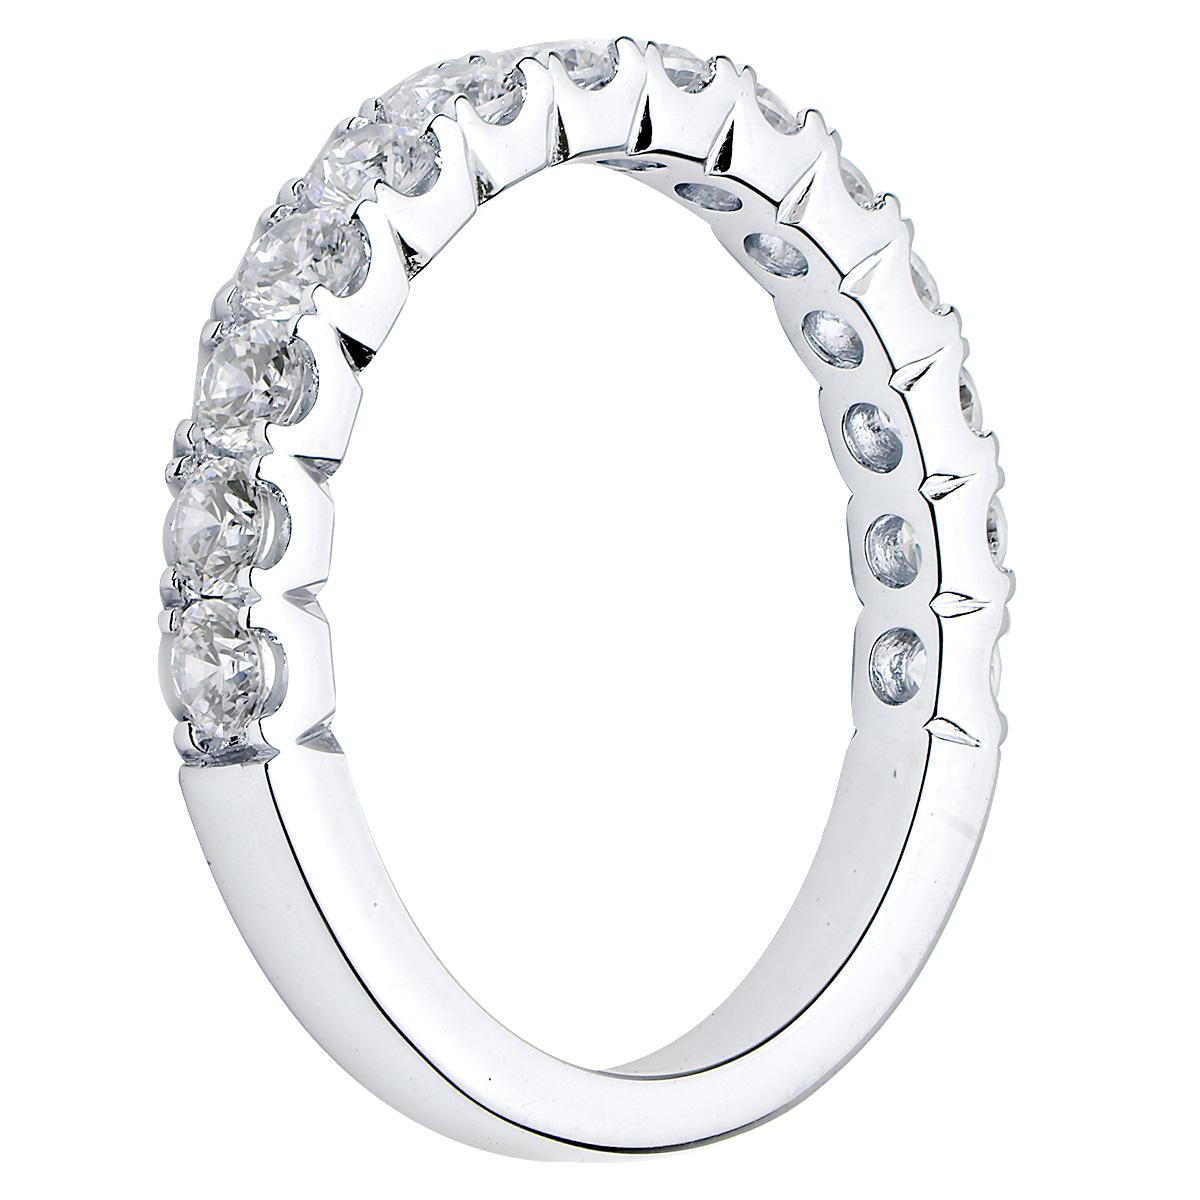 This stunning 18 karat white gold band is made from 3.0 grams of gold. There are 14 round VS2, G color diamonds totaling 0.83 carats giving this band a larger diamond look. The prongs on this ring are beautiful and it is size 7. 